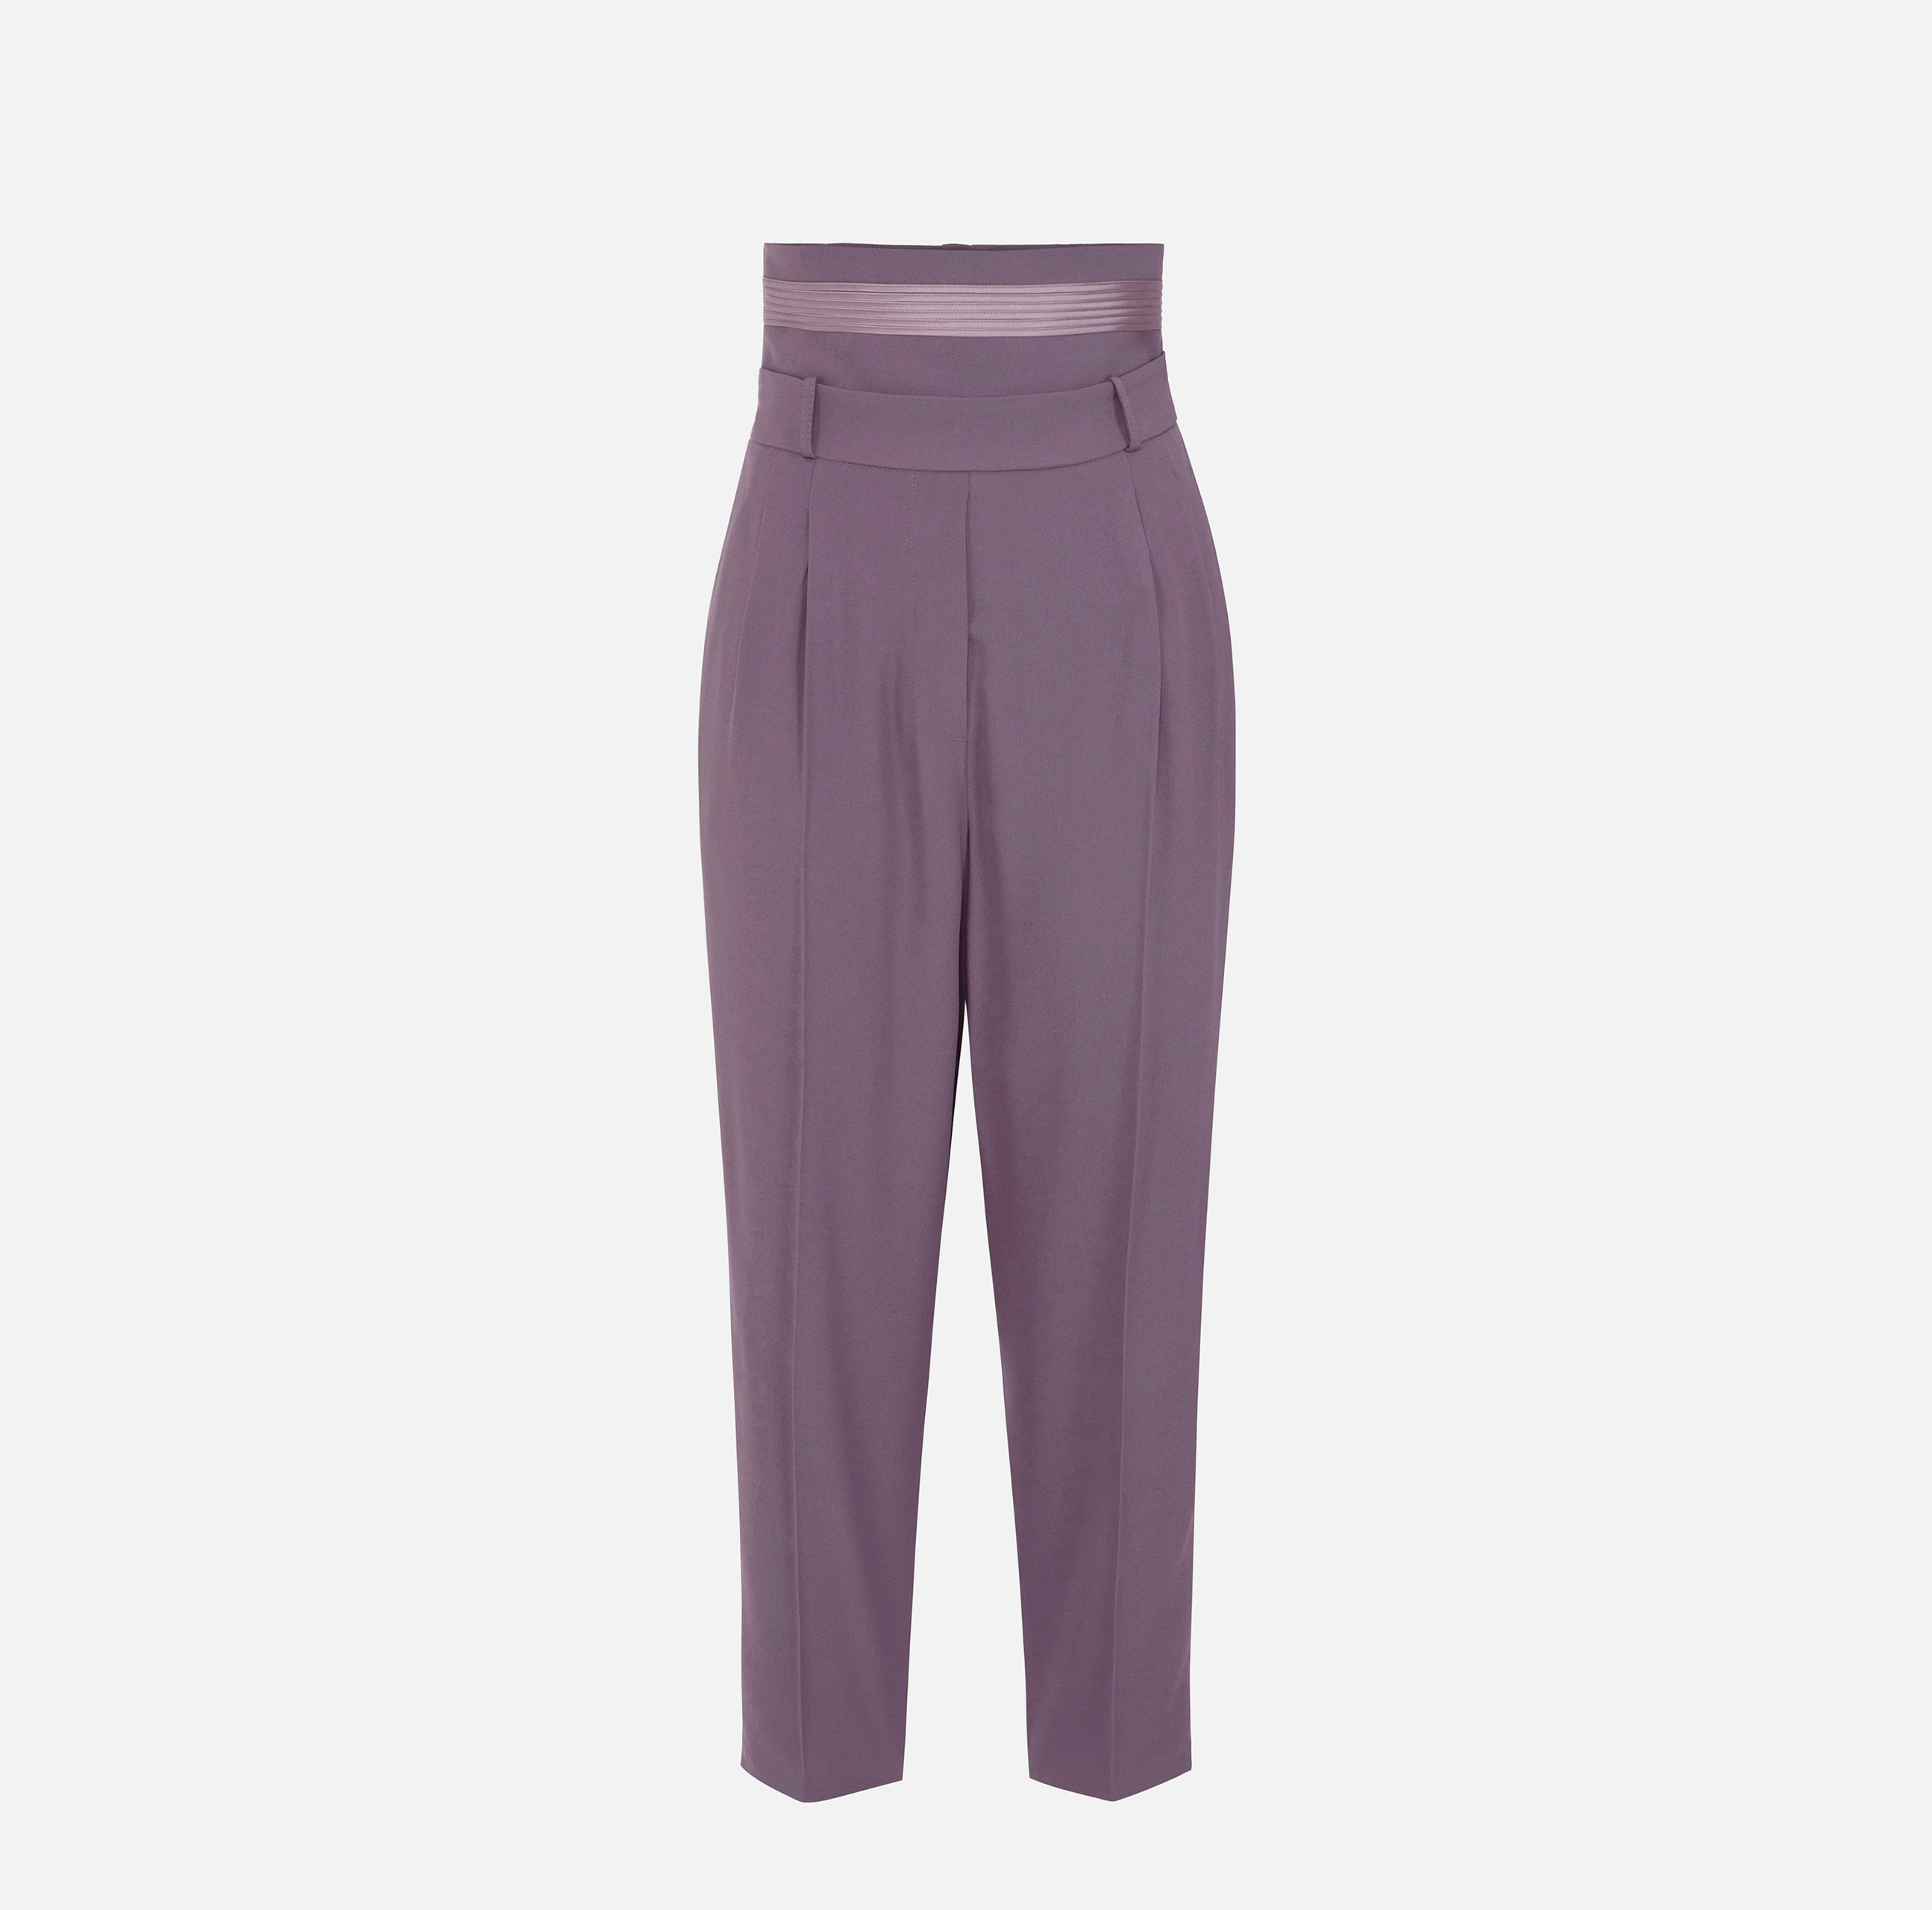 Bell-bottom trousers in stretch crêpe fabric with charms